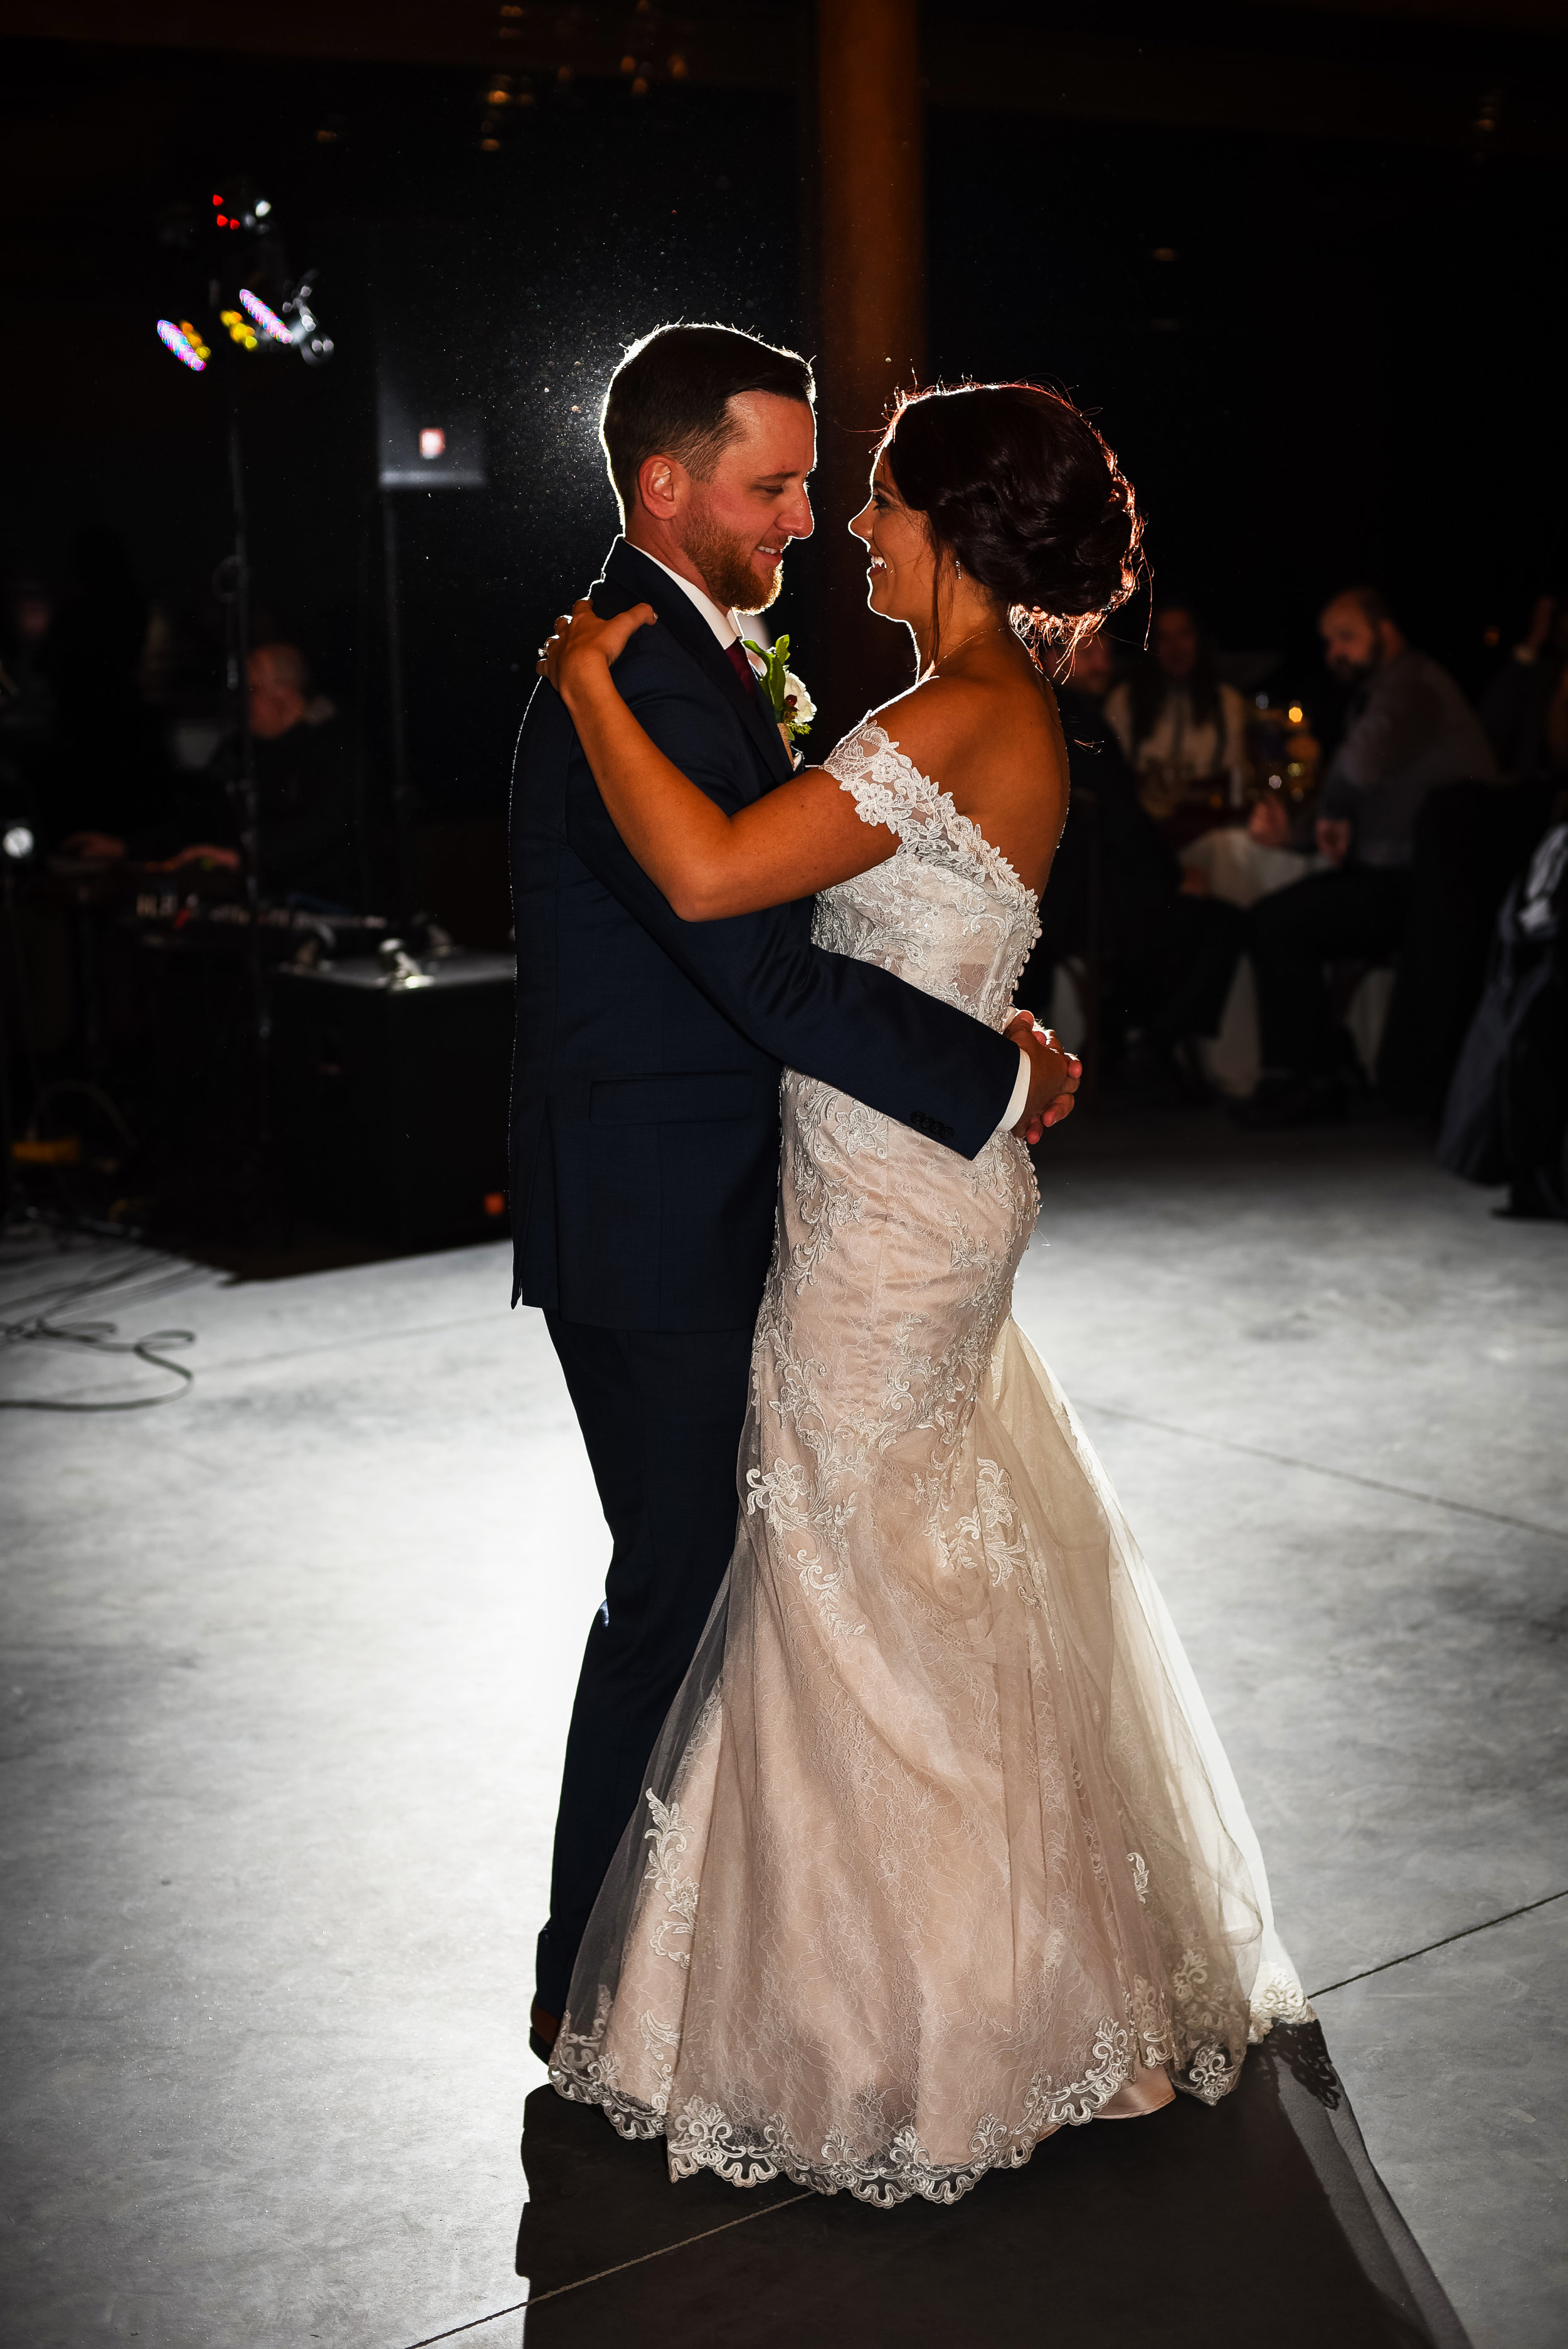 Wedding Couple Dancing (Copyrighted)